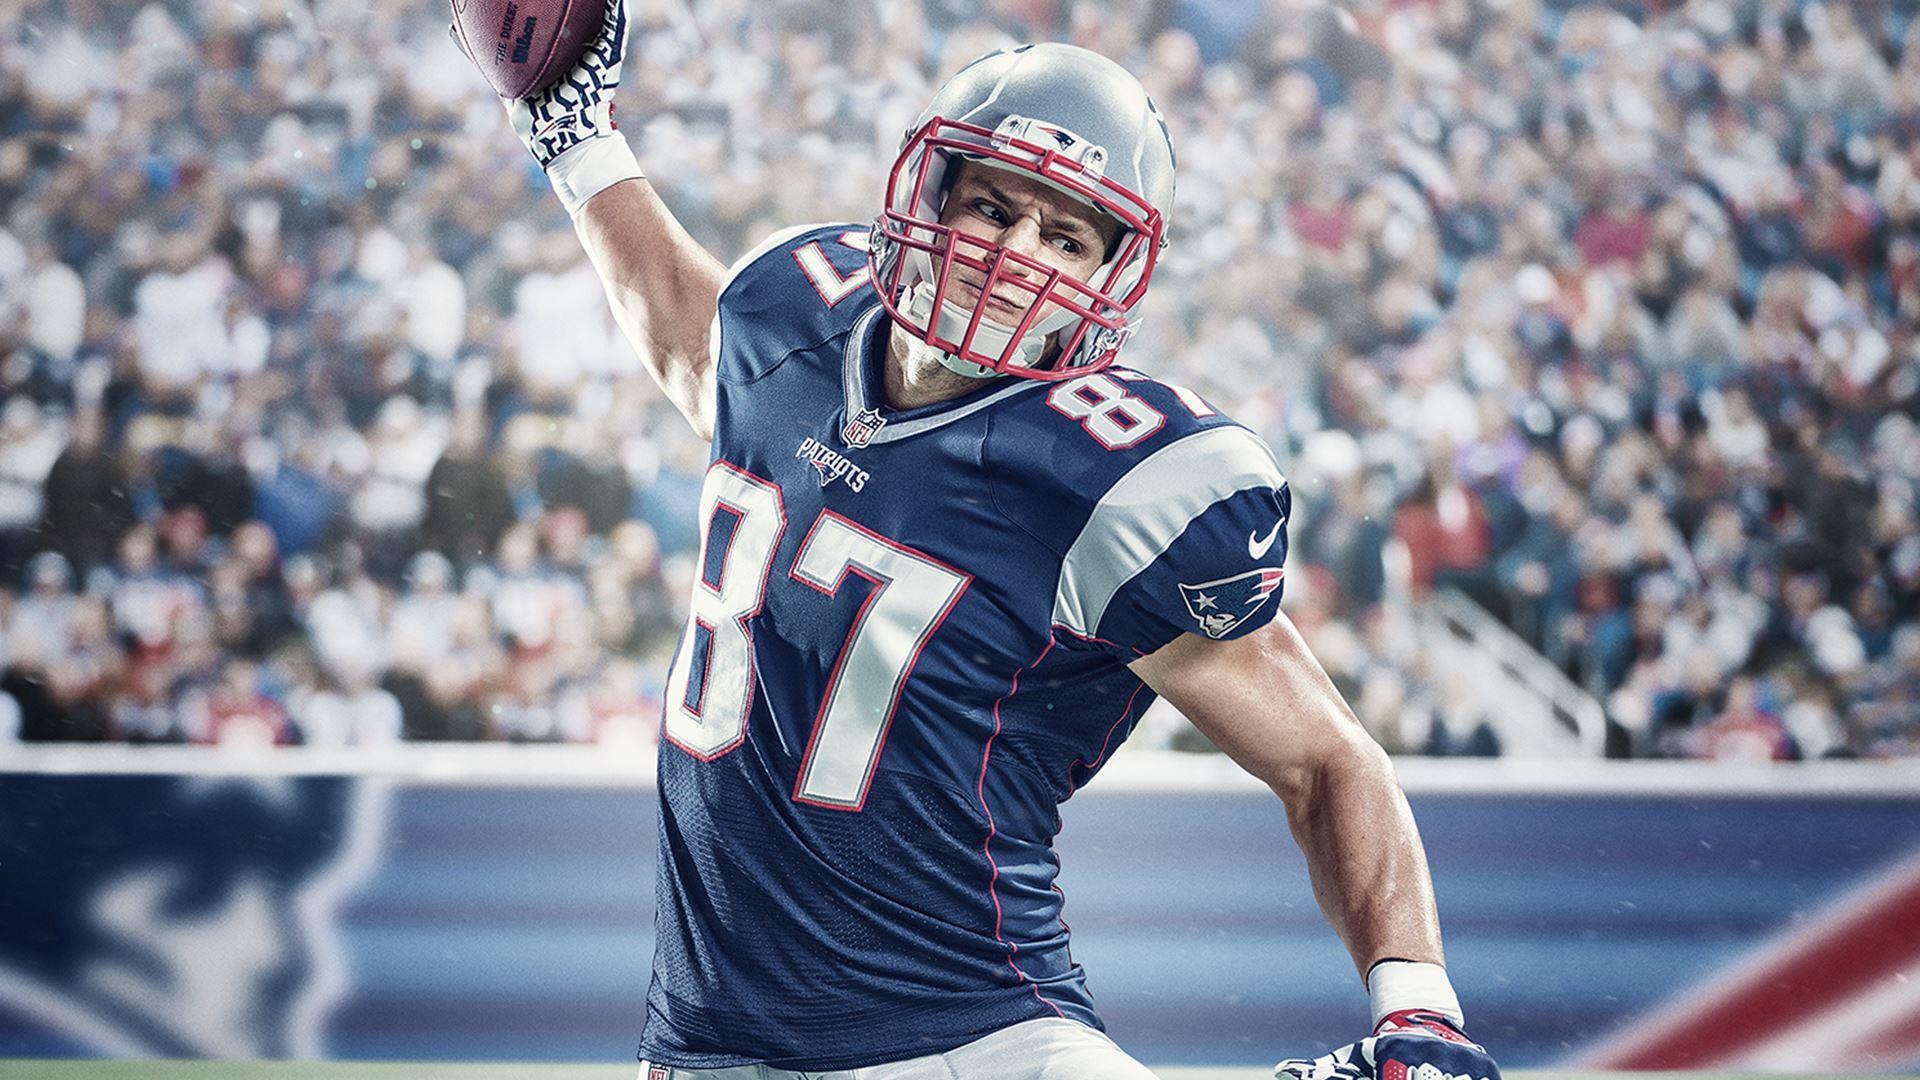 Madden 15 PS4 Review - Another Year, Another Madden